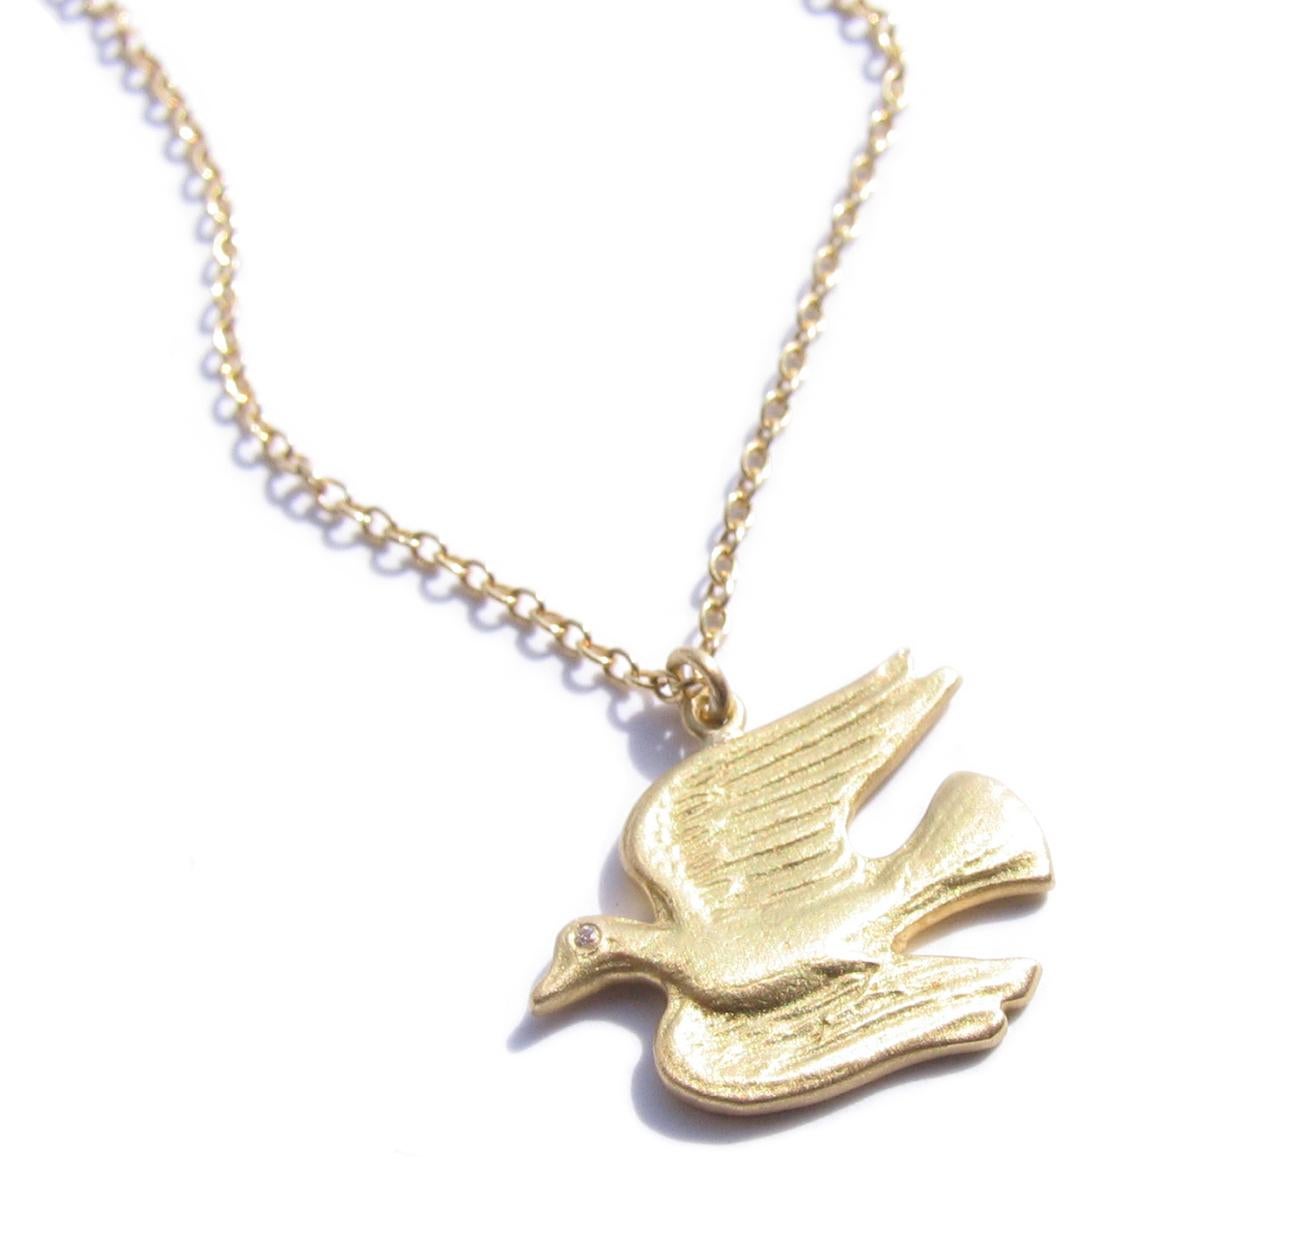 18K Gold flying dove pendant necklace accented with one VS1 diamond.
 Total diamond weight .004 carats. Diameter of dove is ½ X ½  Inches.
 By NYC jeweler Christopher Phelan.
Length of chain measures 16 inches long.

